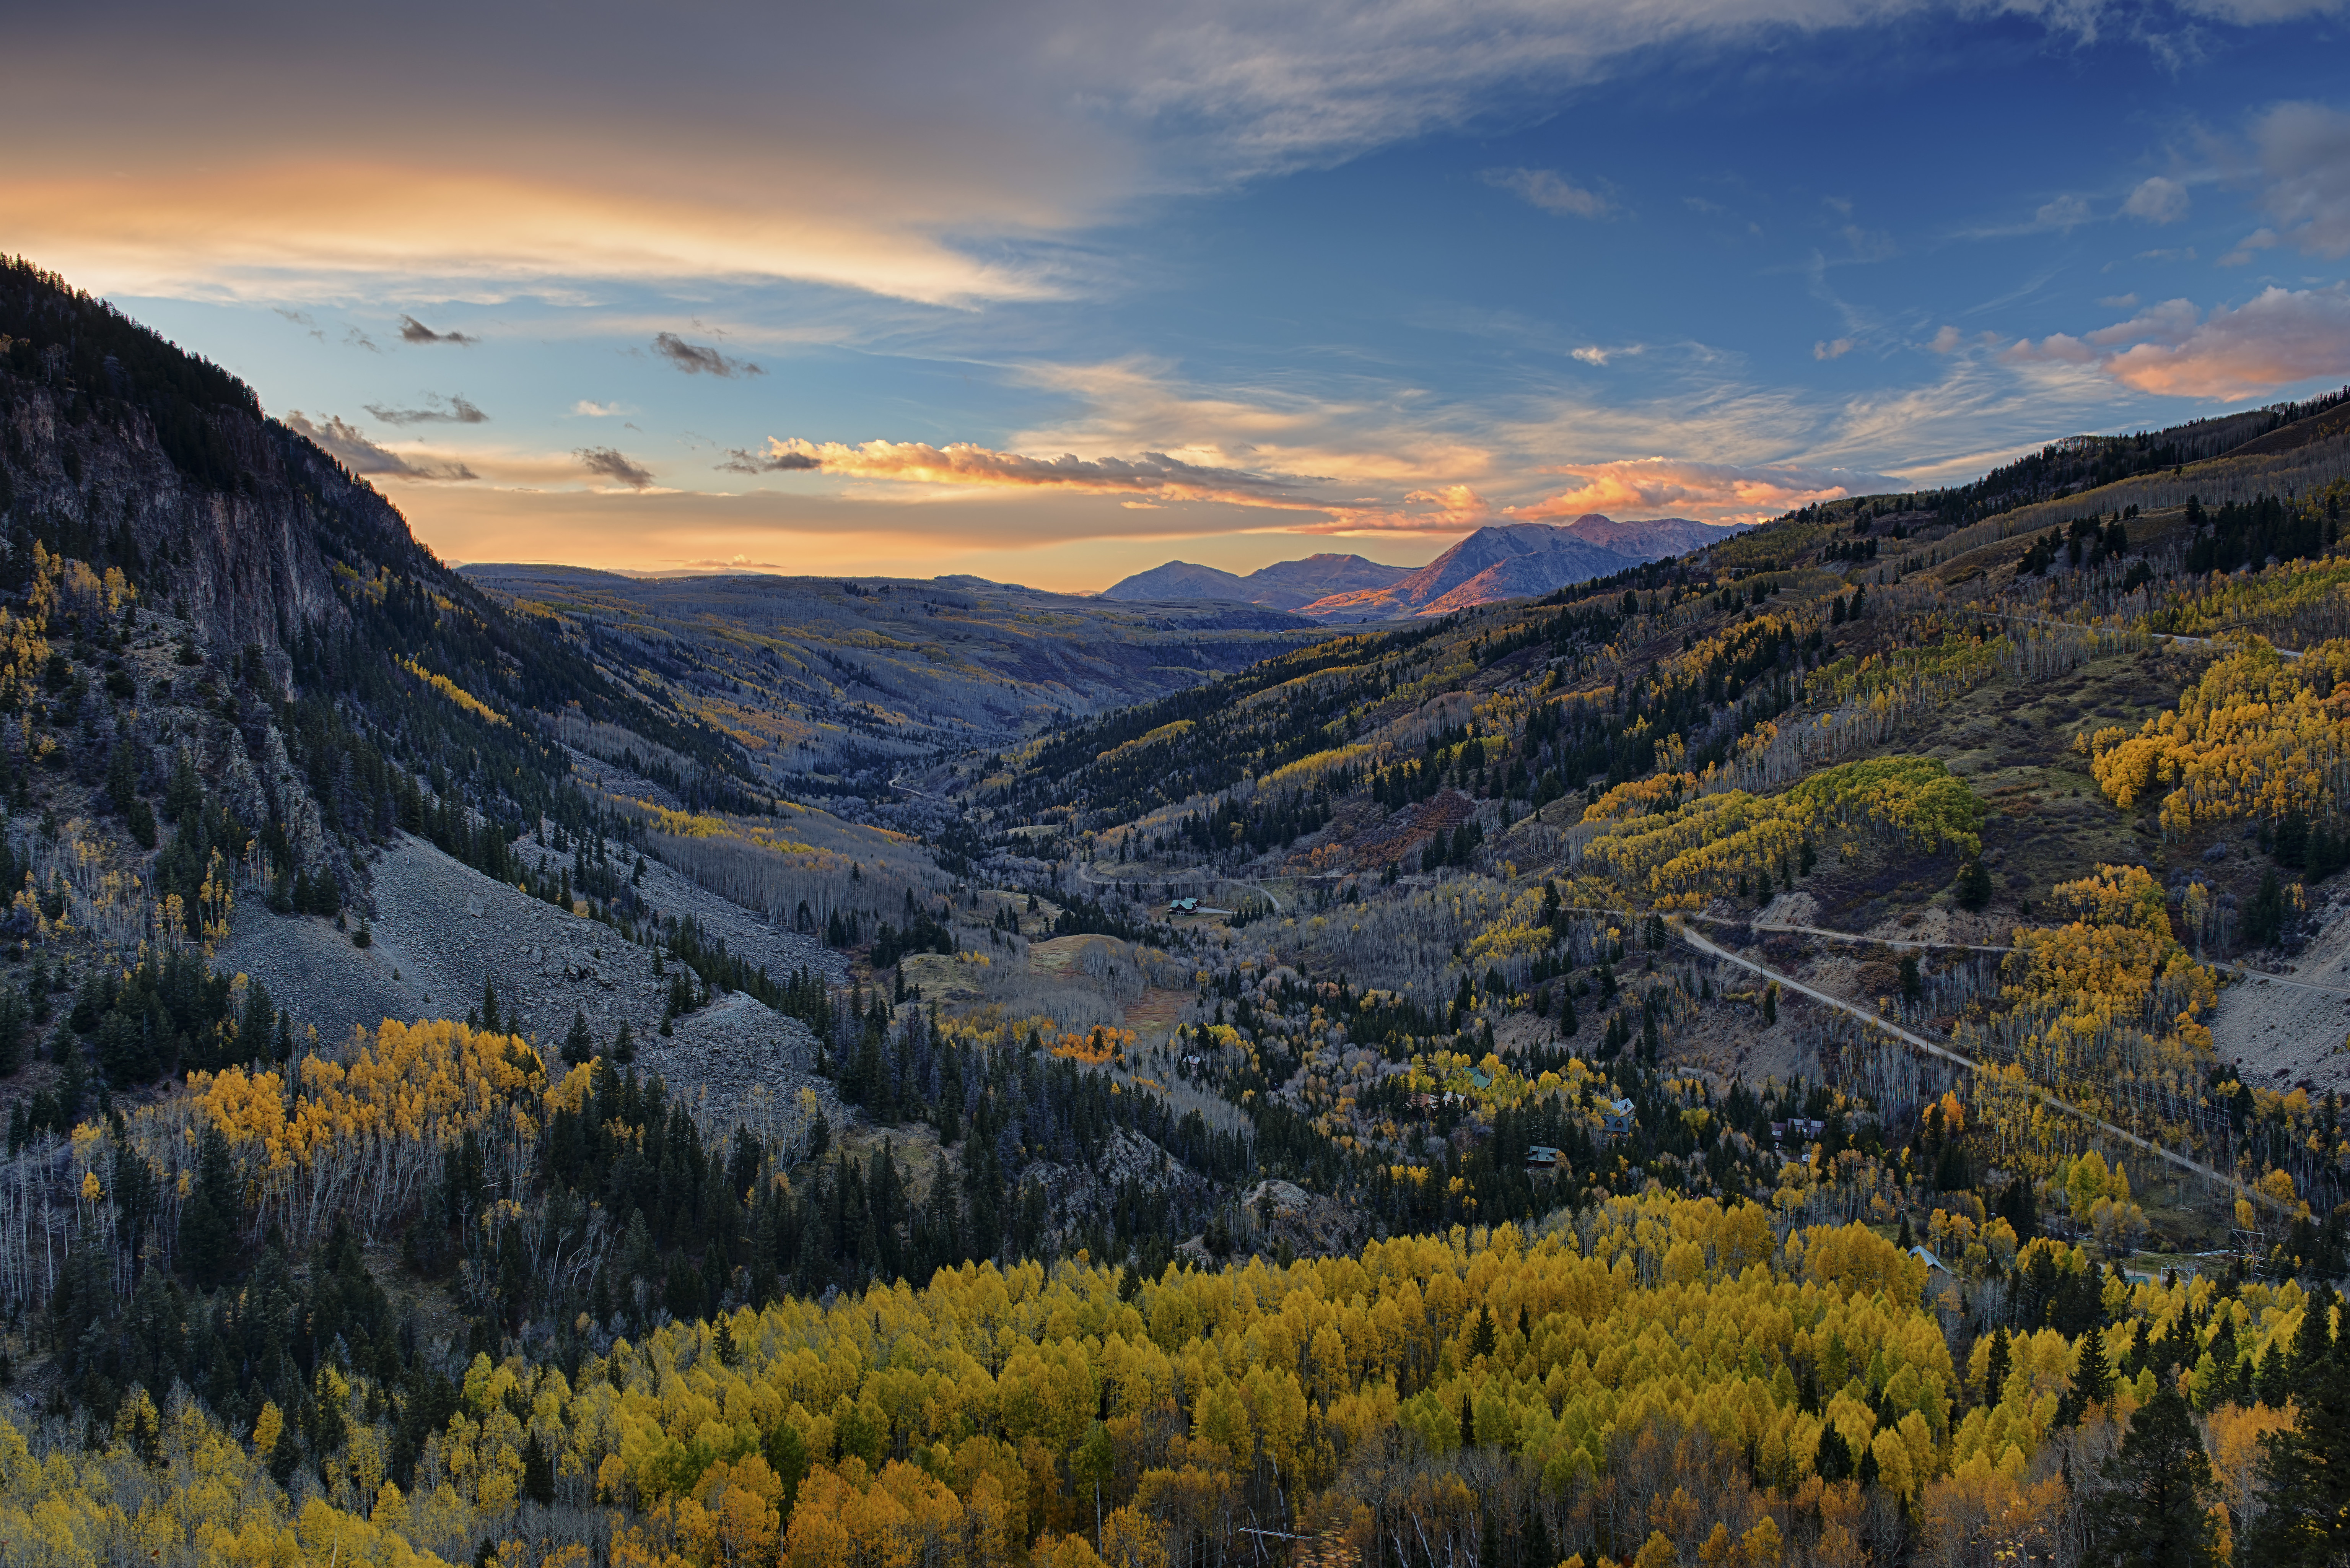 General 6144x4100 Colorado photography landscape fall Aspen San Miguel sunset sky clouds trees nature mountains sunset glow